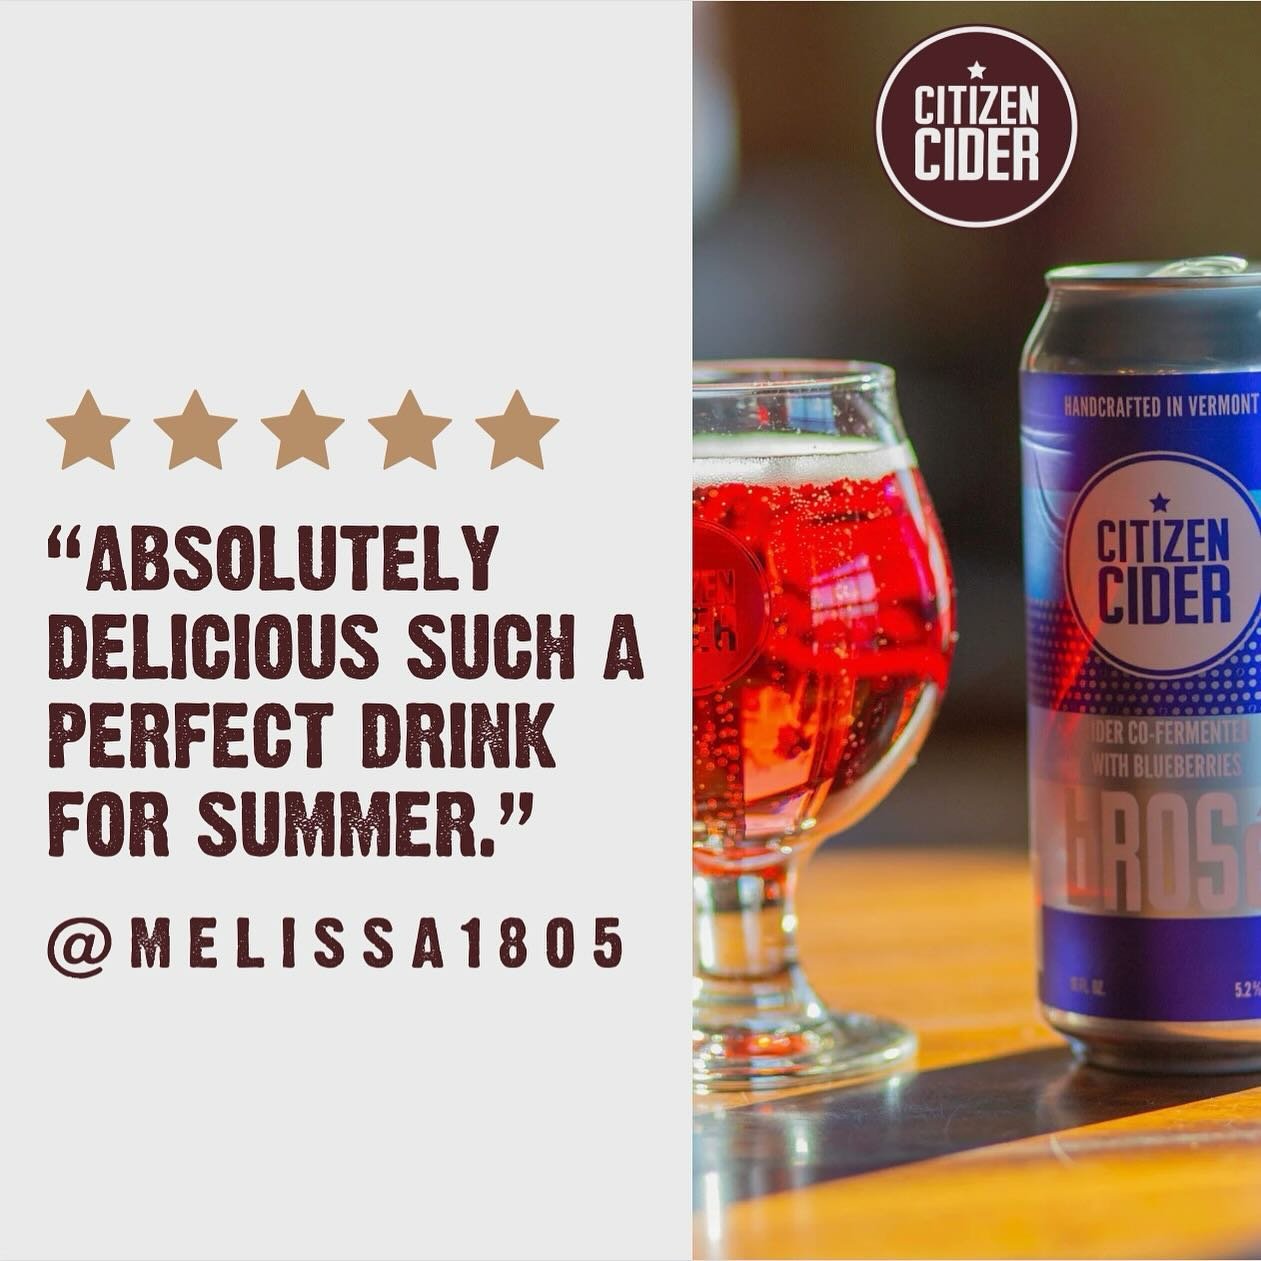 bRos&eacute; all May
Warmer weather is here, grab a taste of summer
Cider co-fermented with blueberries
☀️ #DrinkbRos&eacute; #SummerEssential